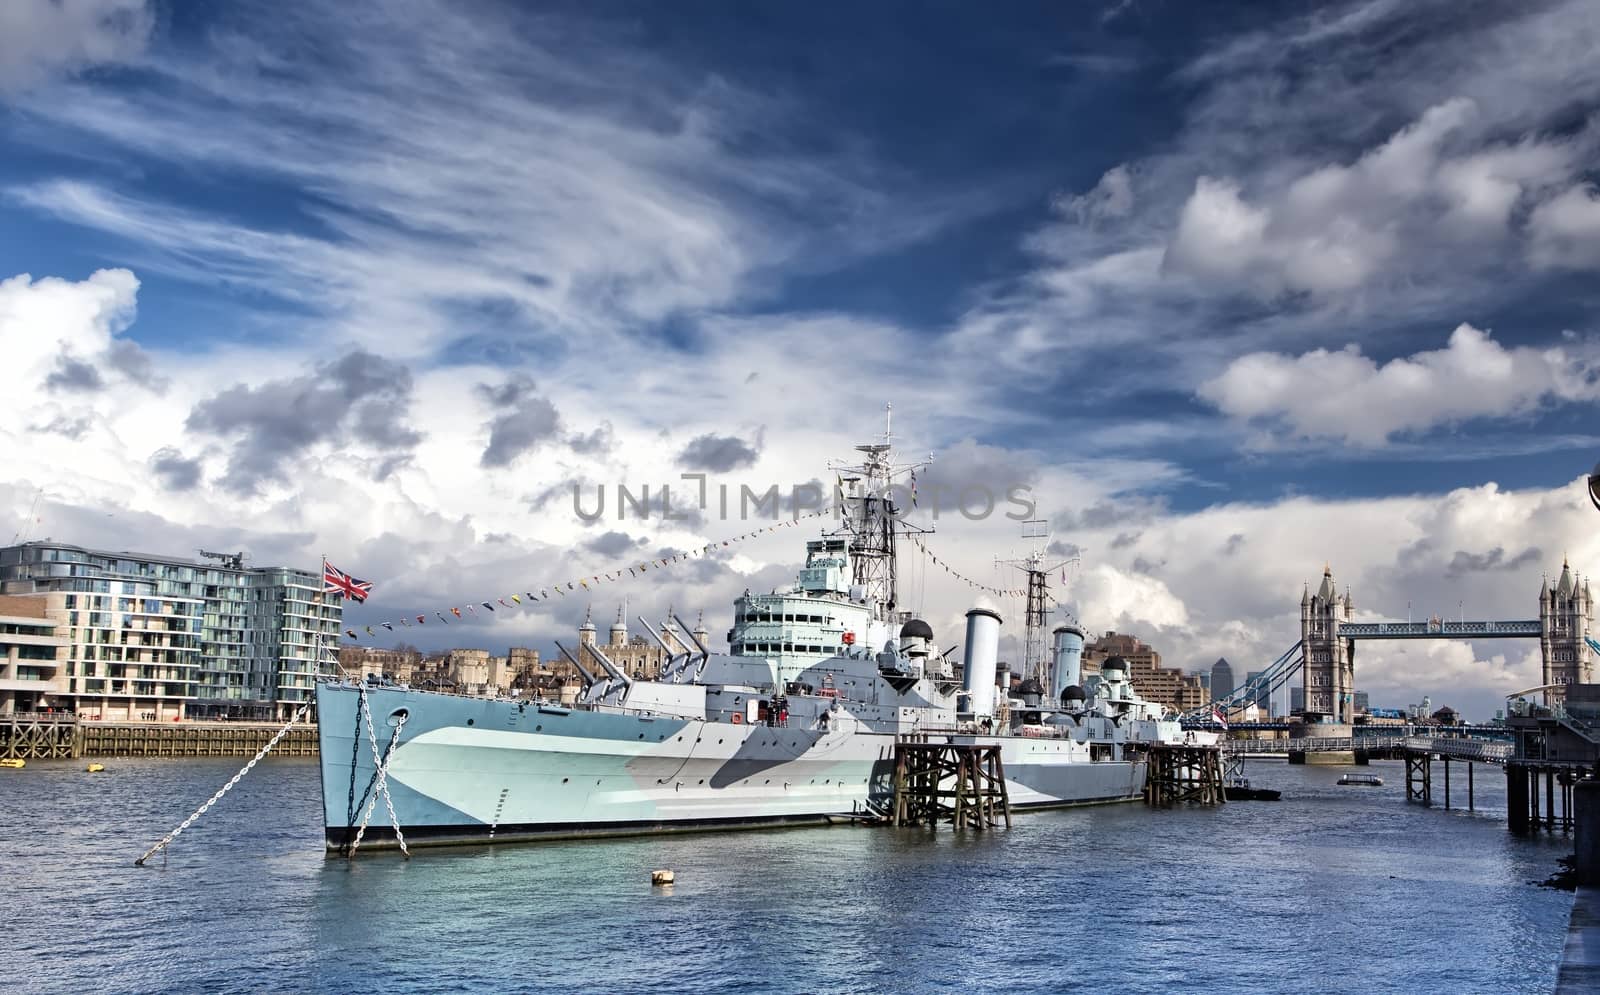 City of London and HMS Belfast warship  by mitakag